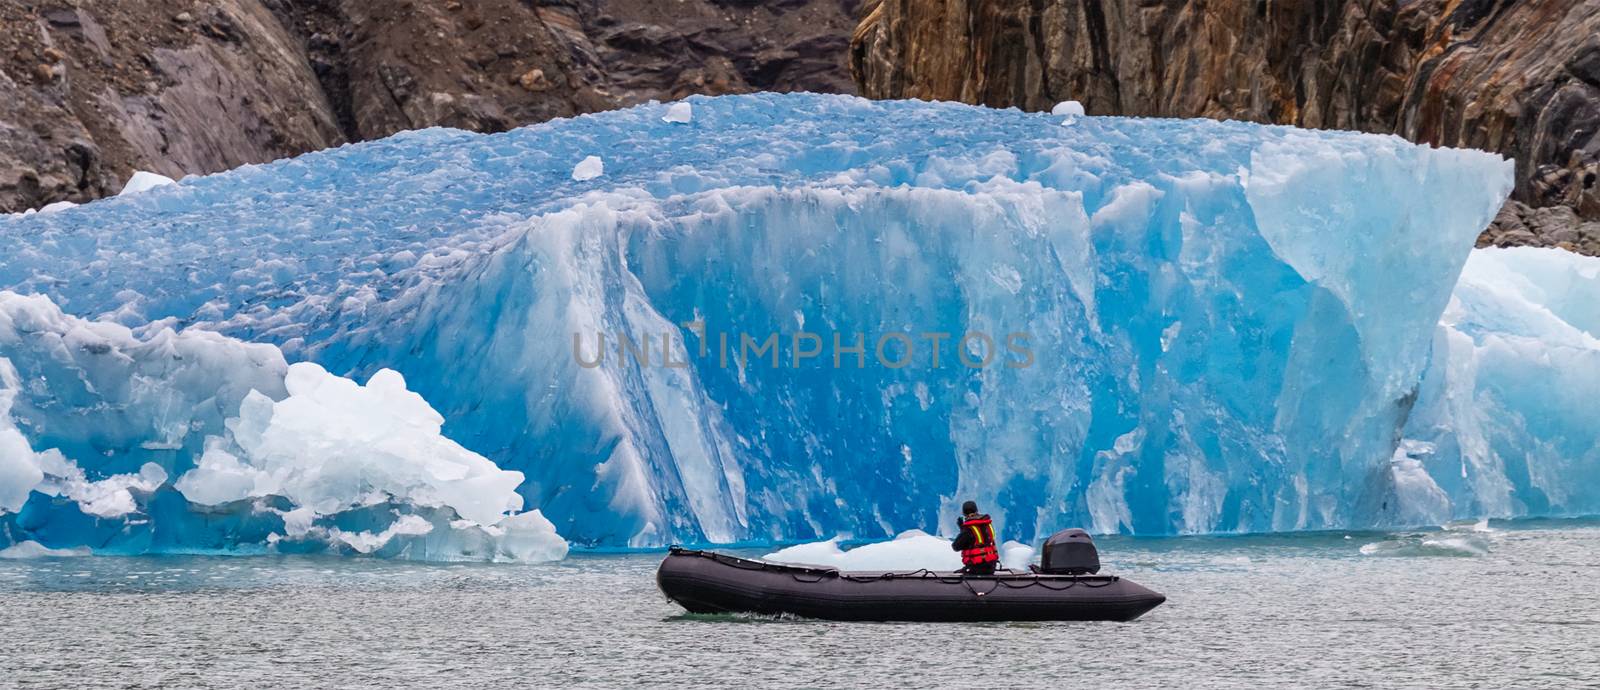 Tourist sailing in a boat by iceberg in fjord by DamantisZ